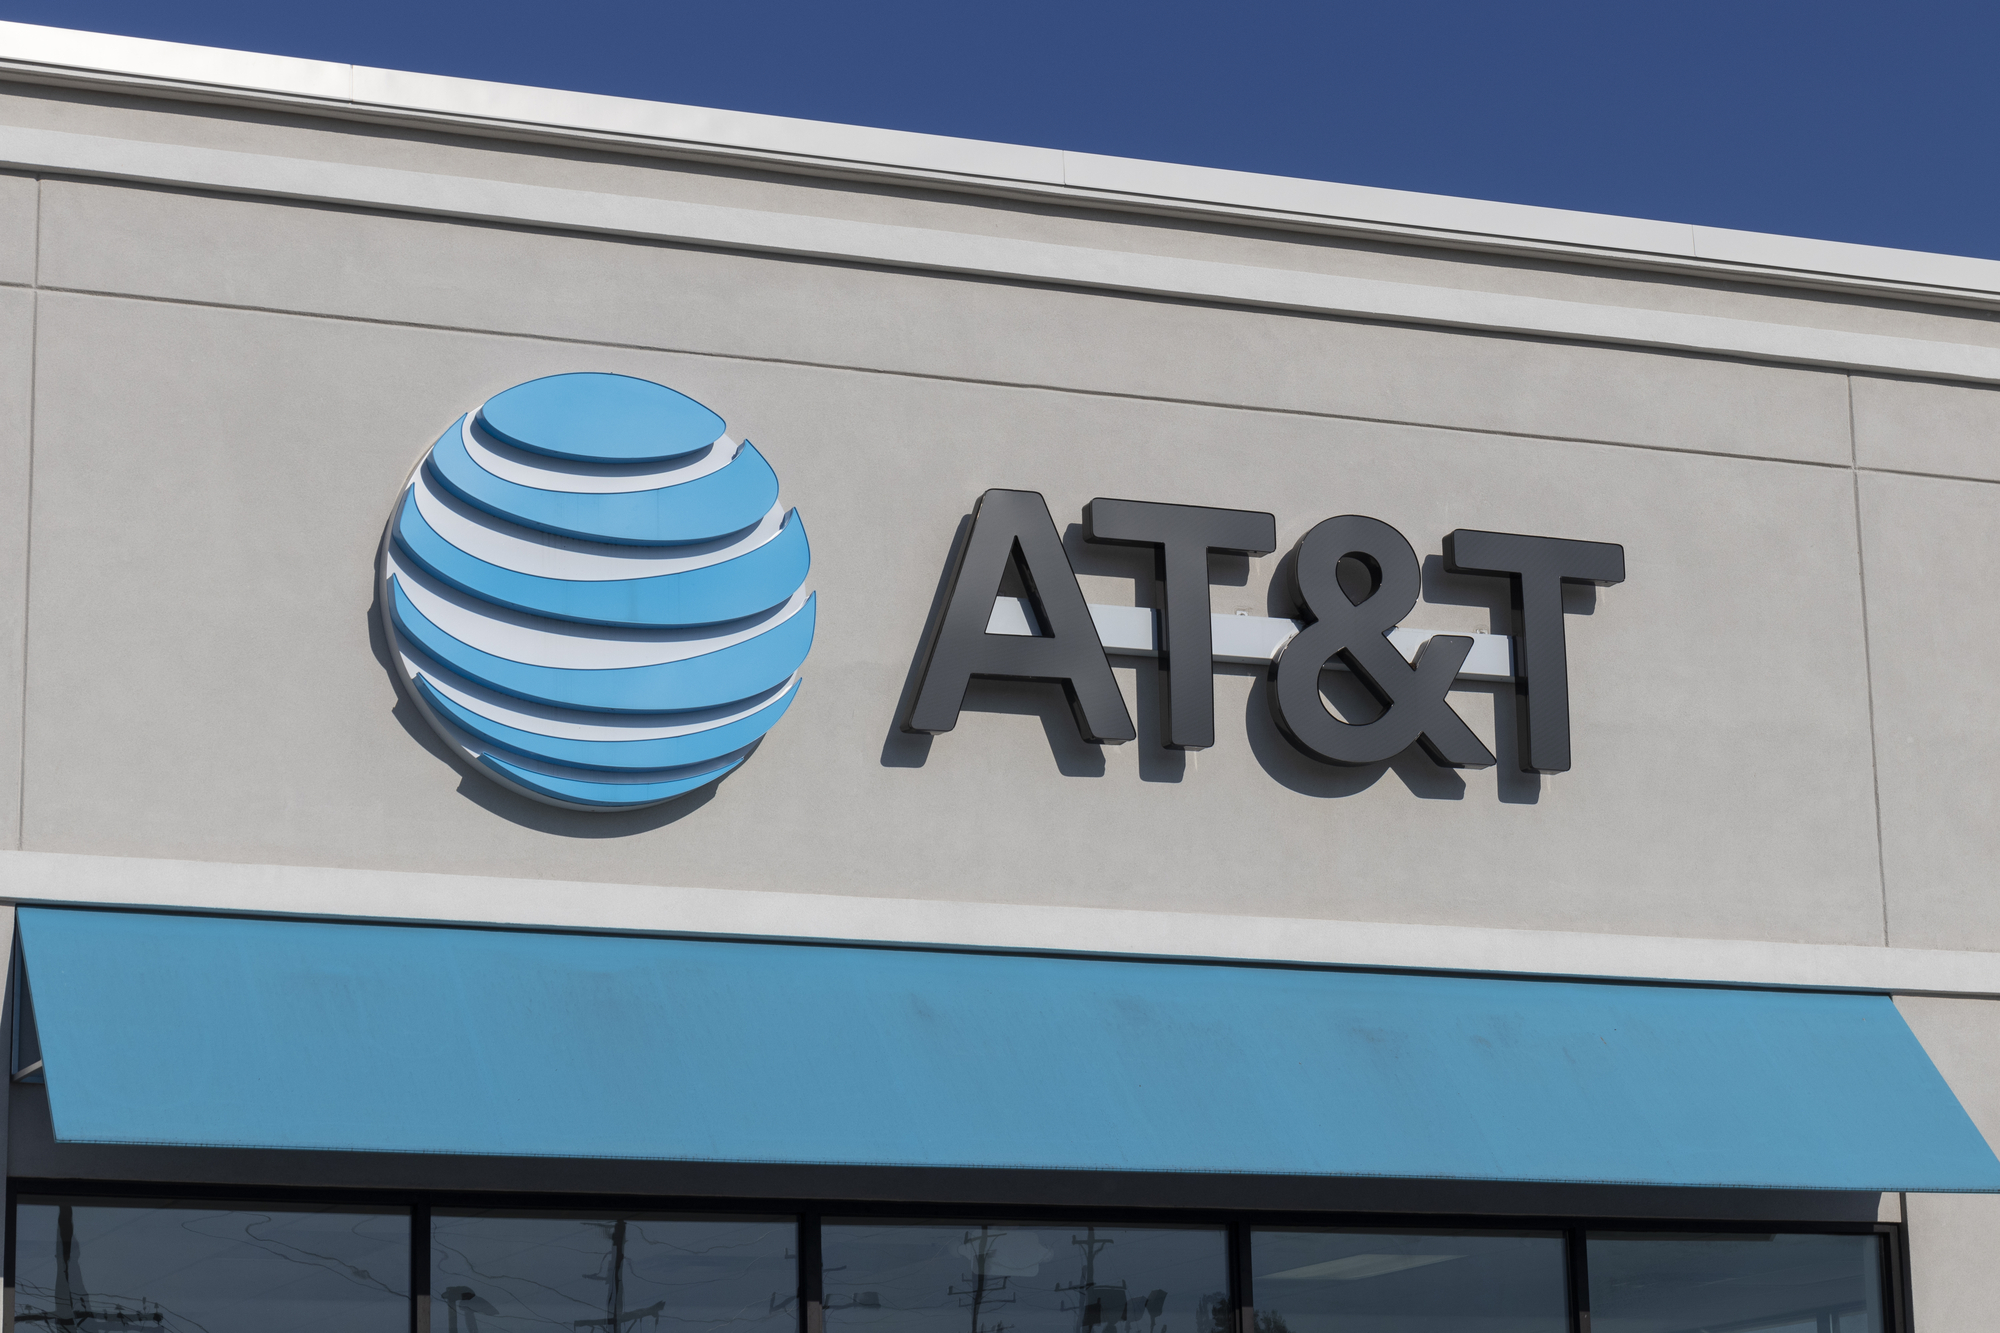 Here’s What AT&T Says The Massive Outage Was Caused By